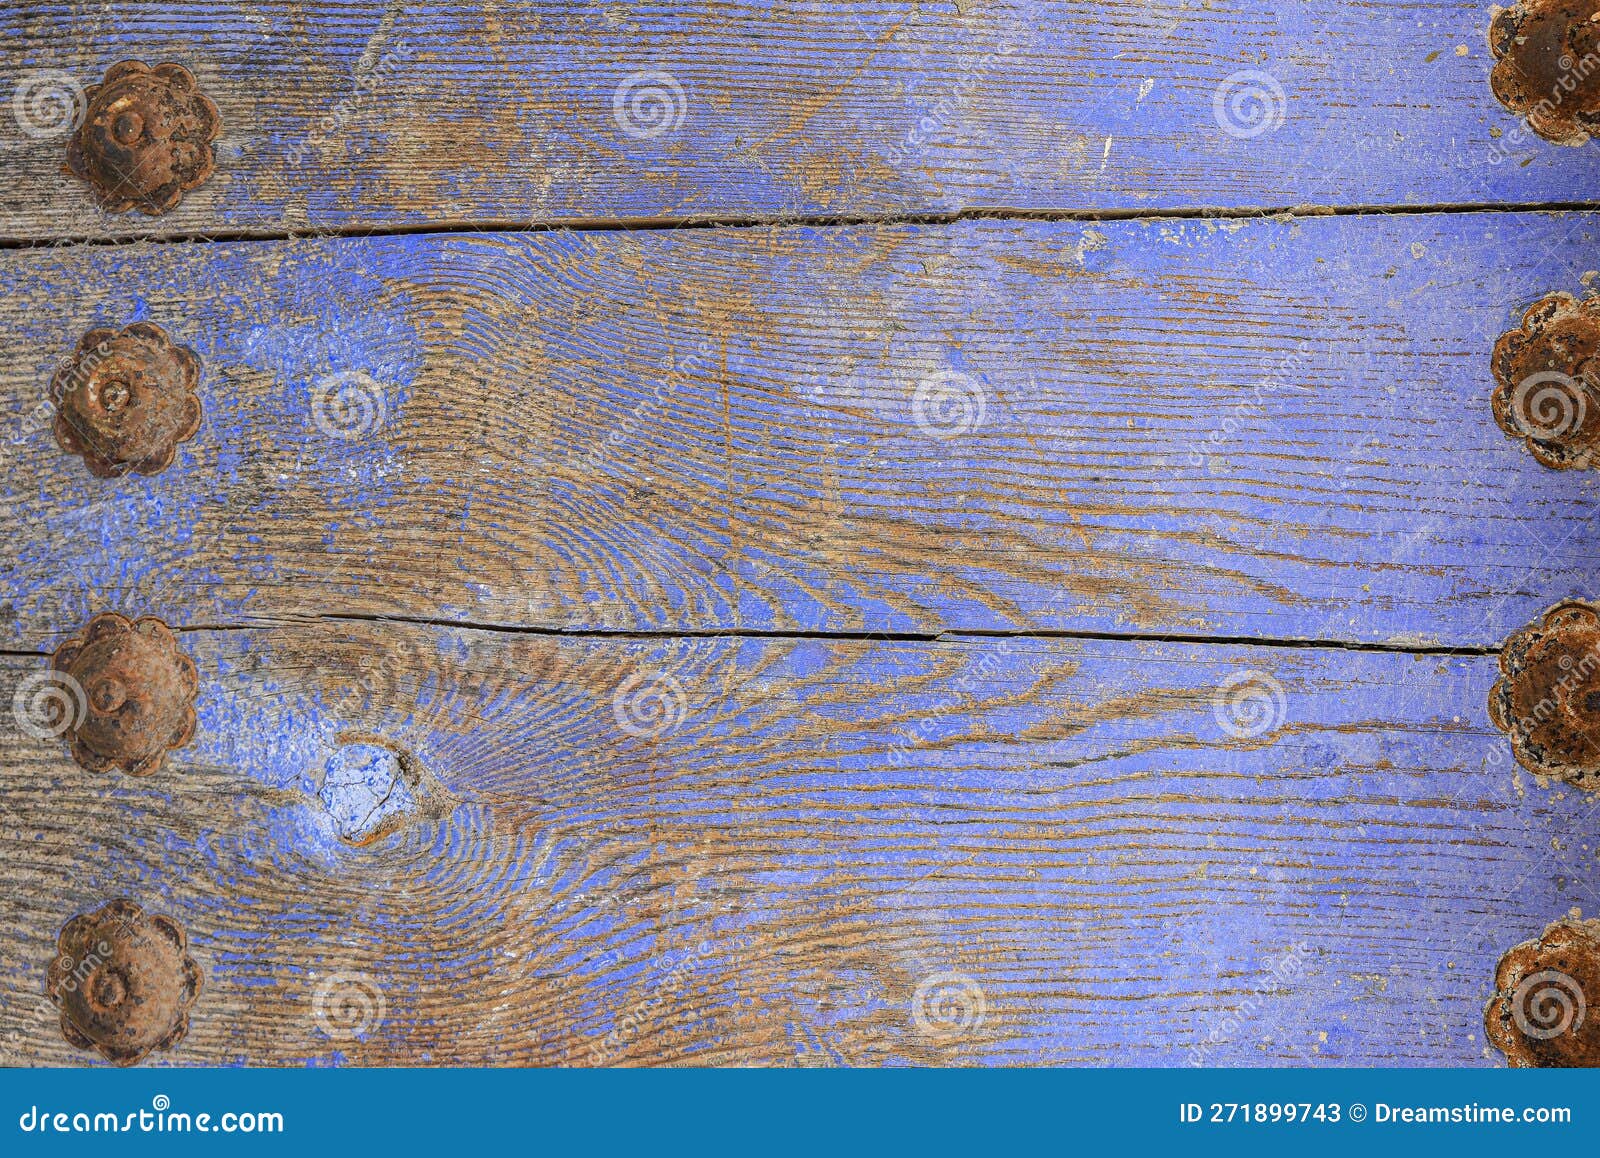 violet blue wooden background with rusty nails and cracks